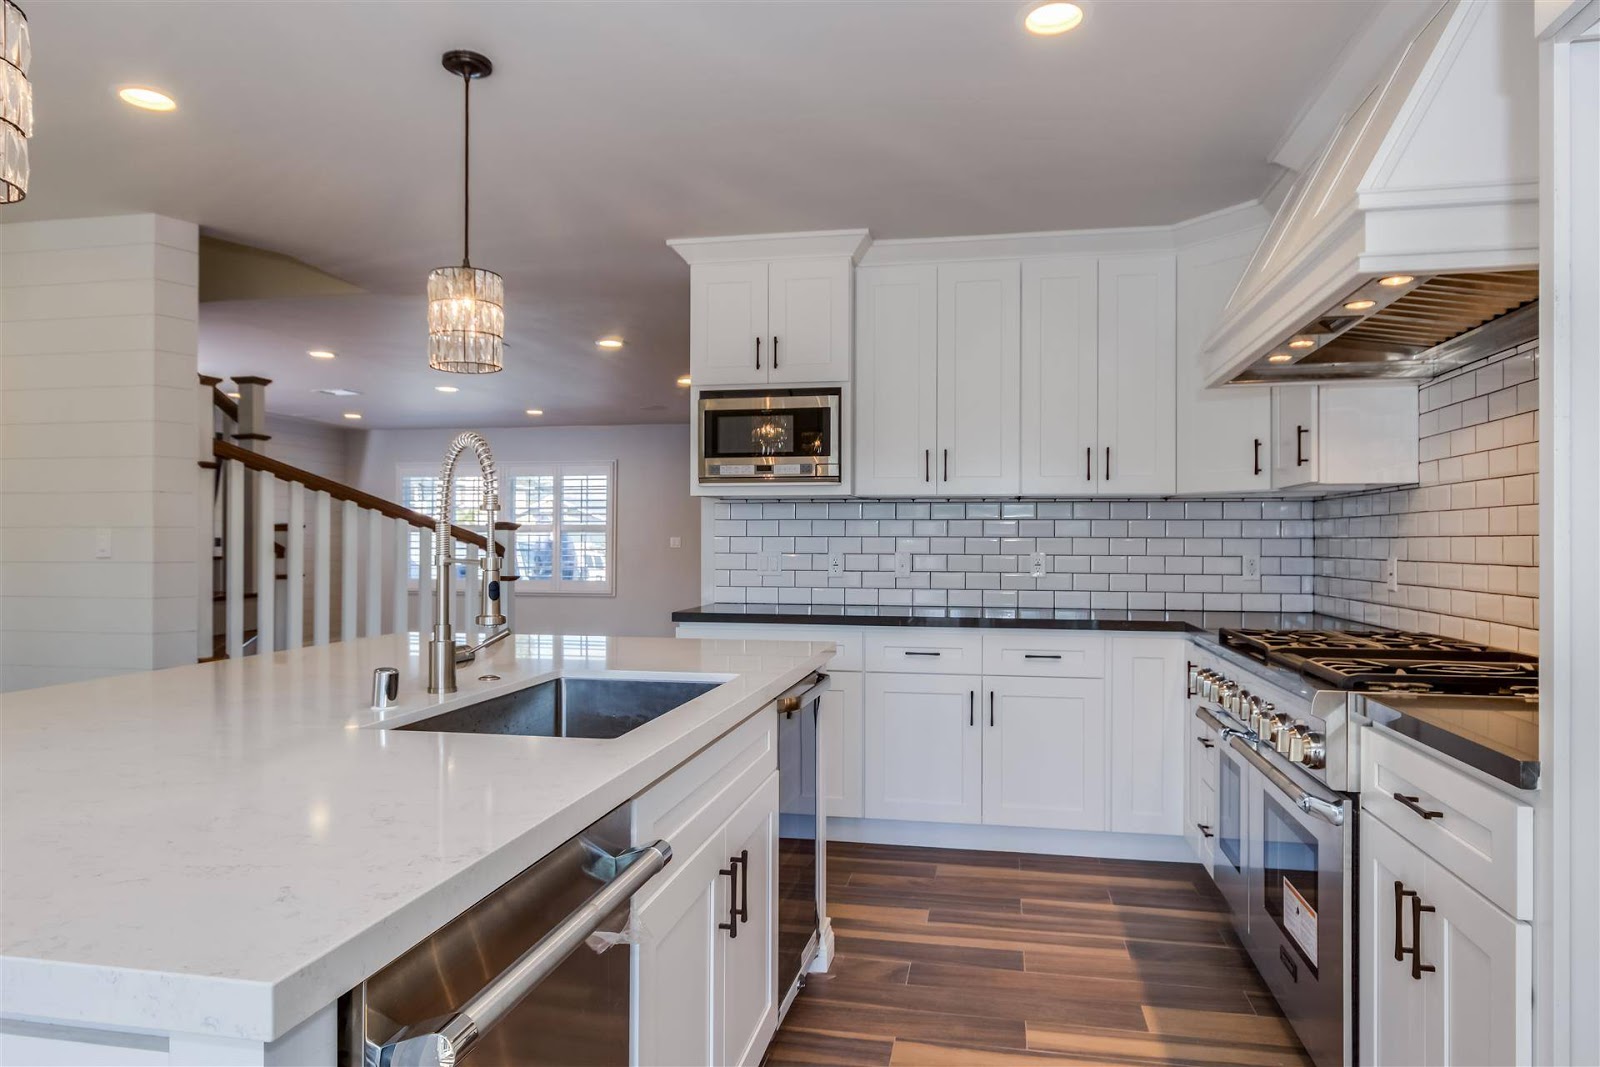 22 Amazing Kitchen Remodels you will not believe! If you think this is ...